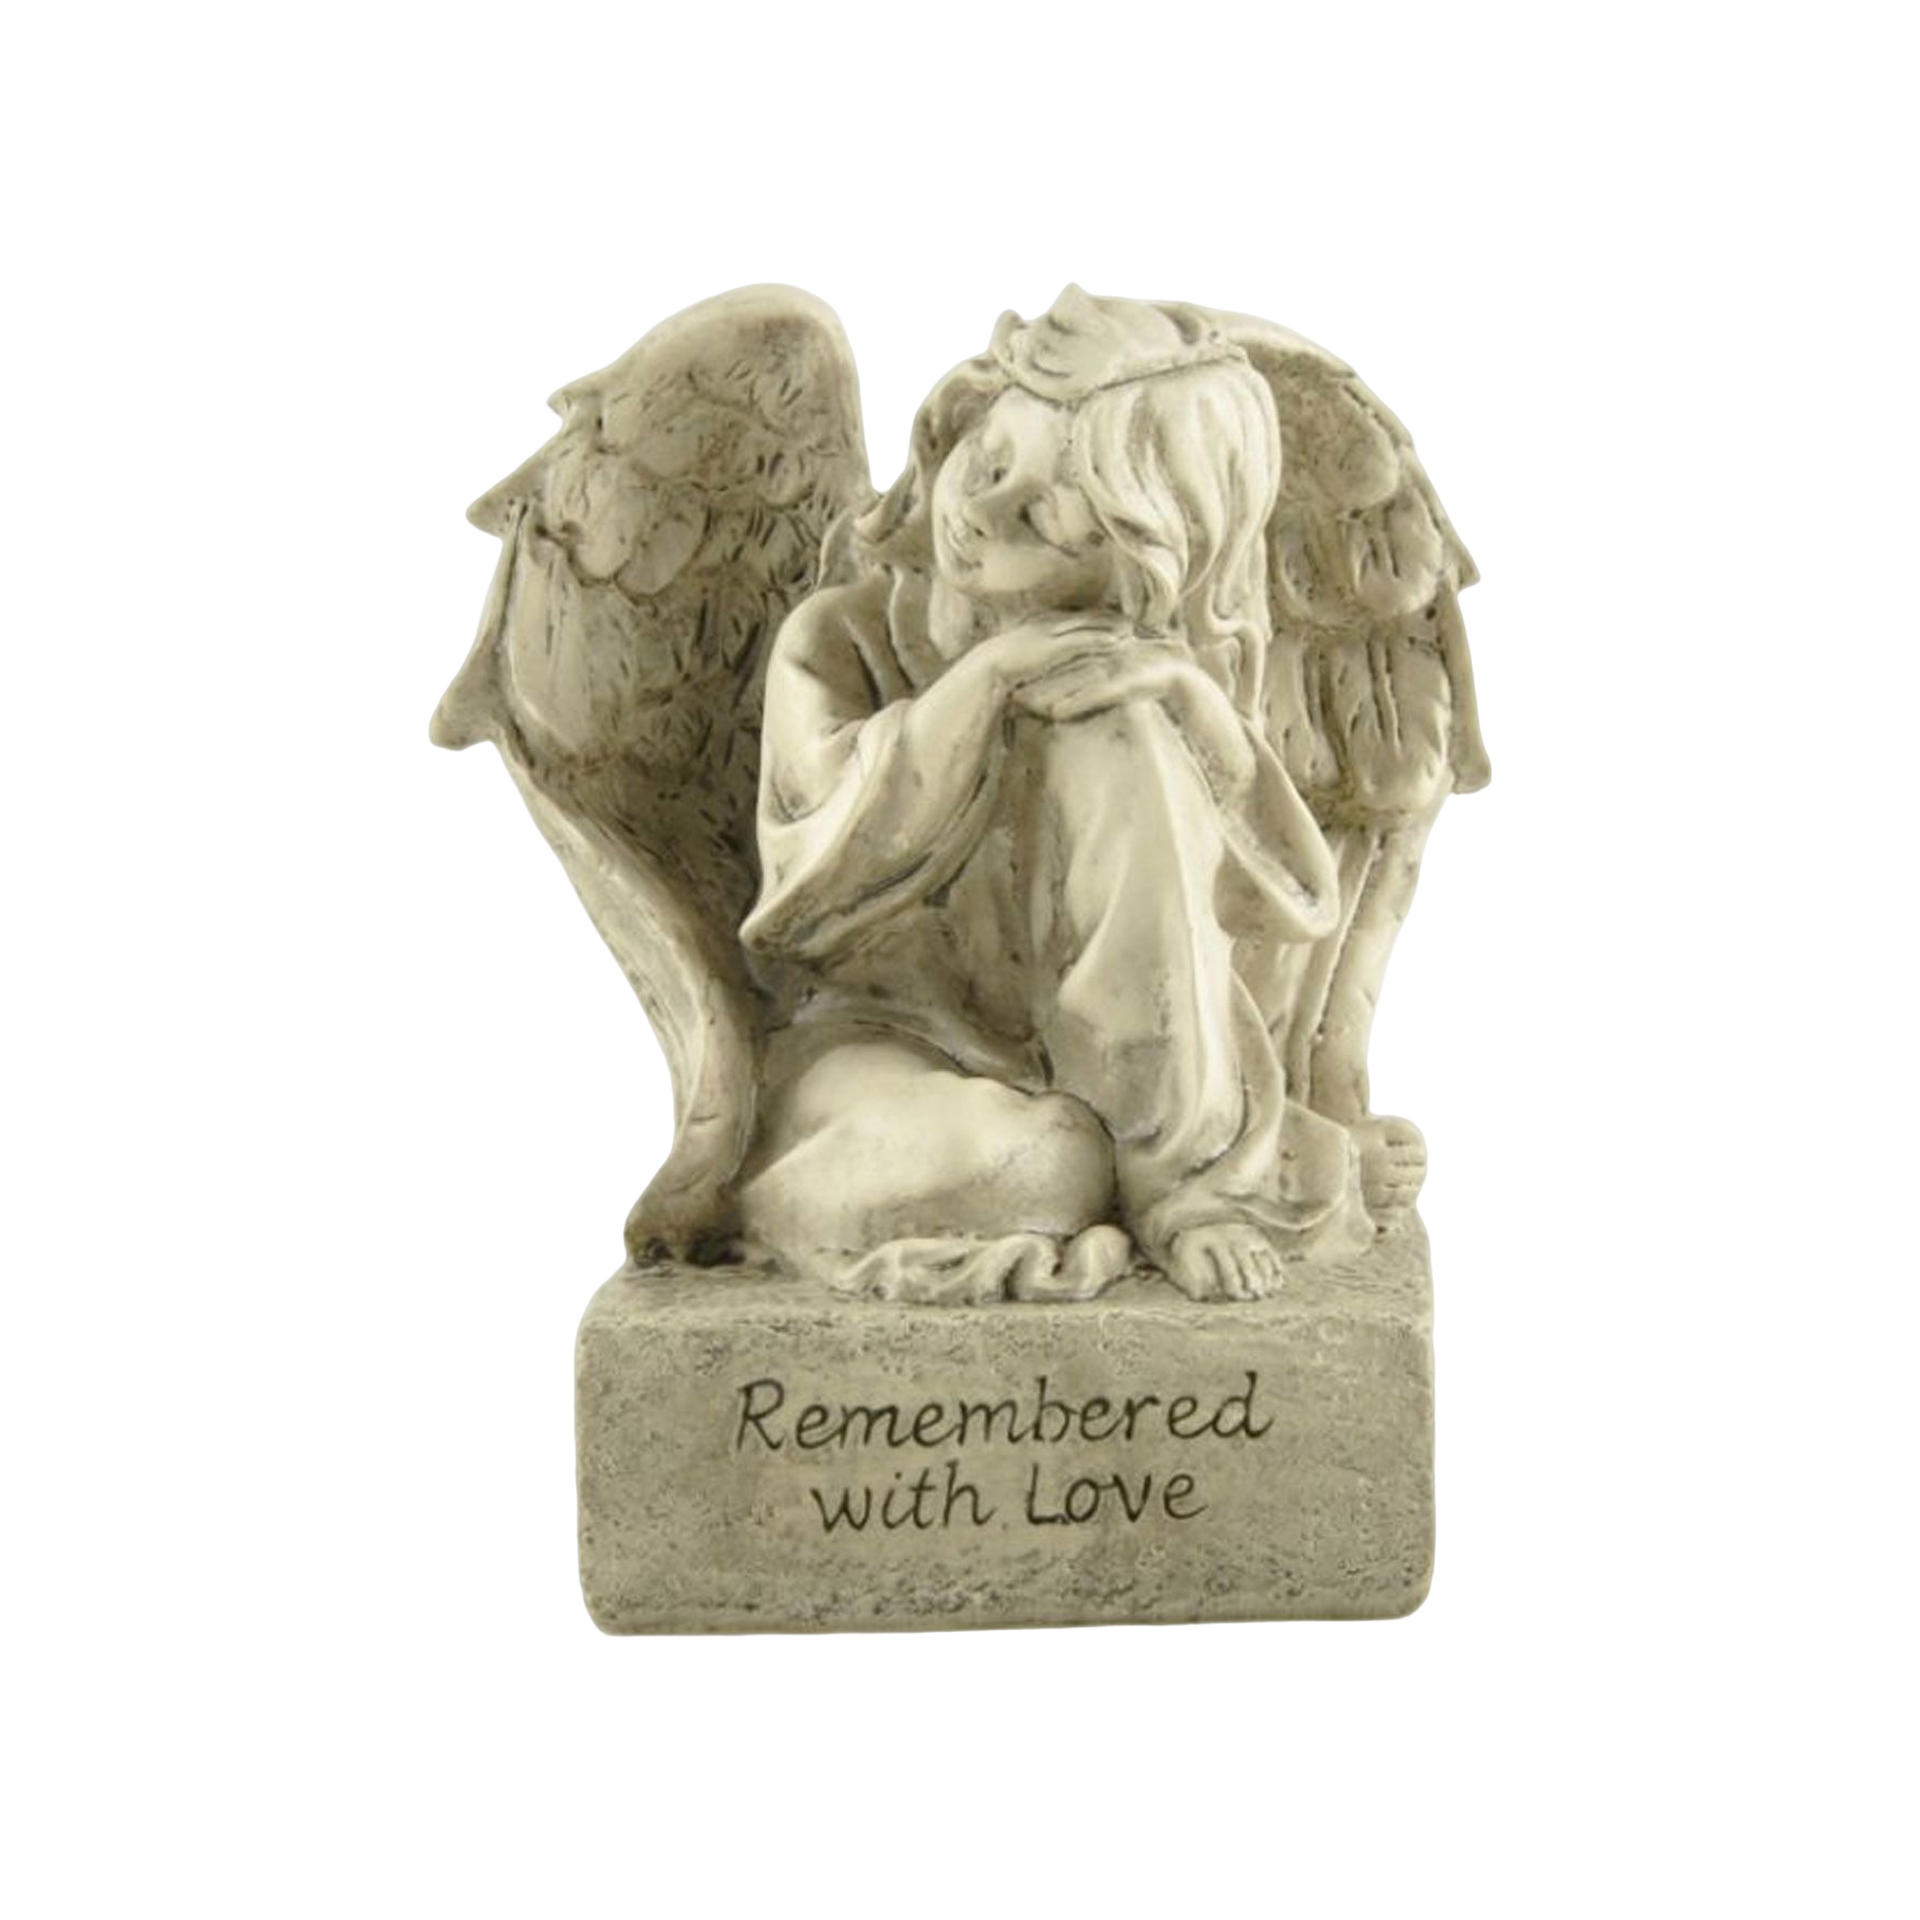 Praying Angel Statue-Guardian Angel Figurines, Resin White Wings Angel Statue Memorial Cherub Sculpture for Home Table Living Room Bedroom Decor Figurine Religious Spirituality Memorial Gift,3.74